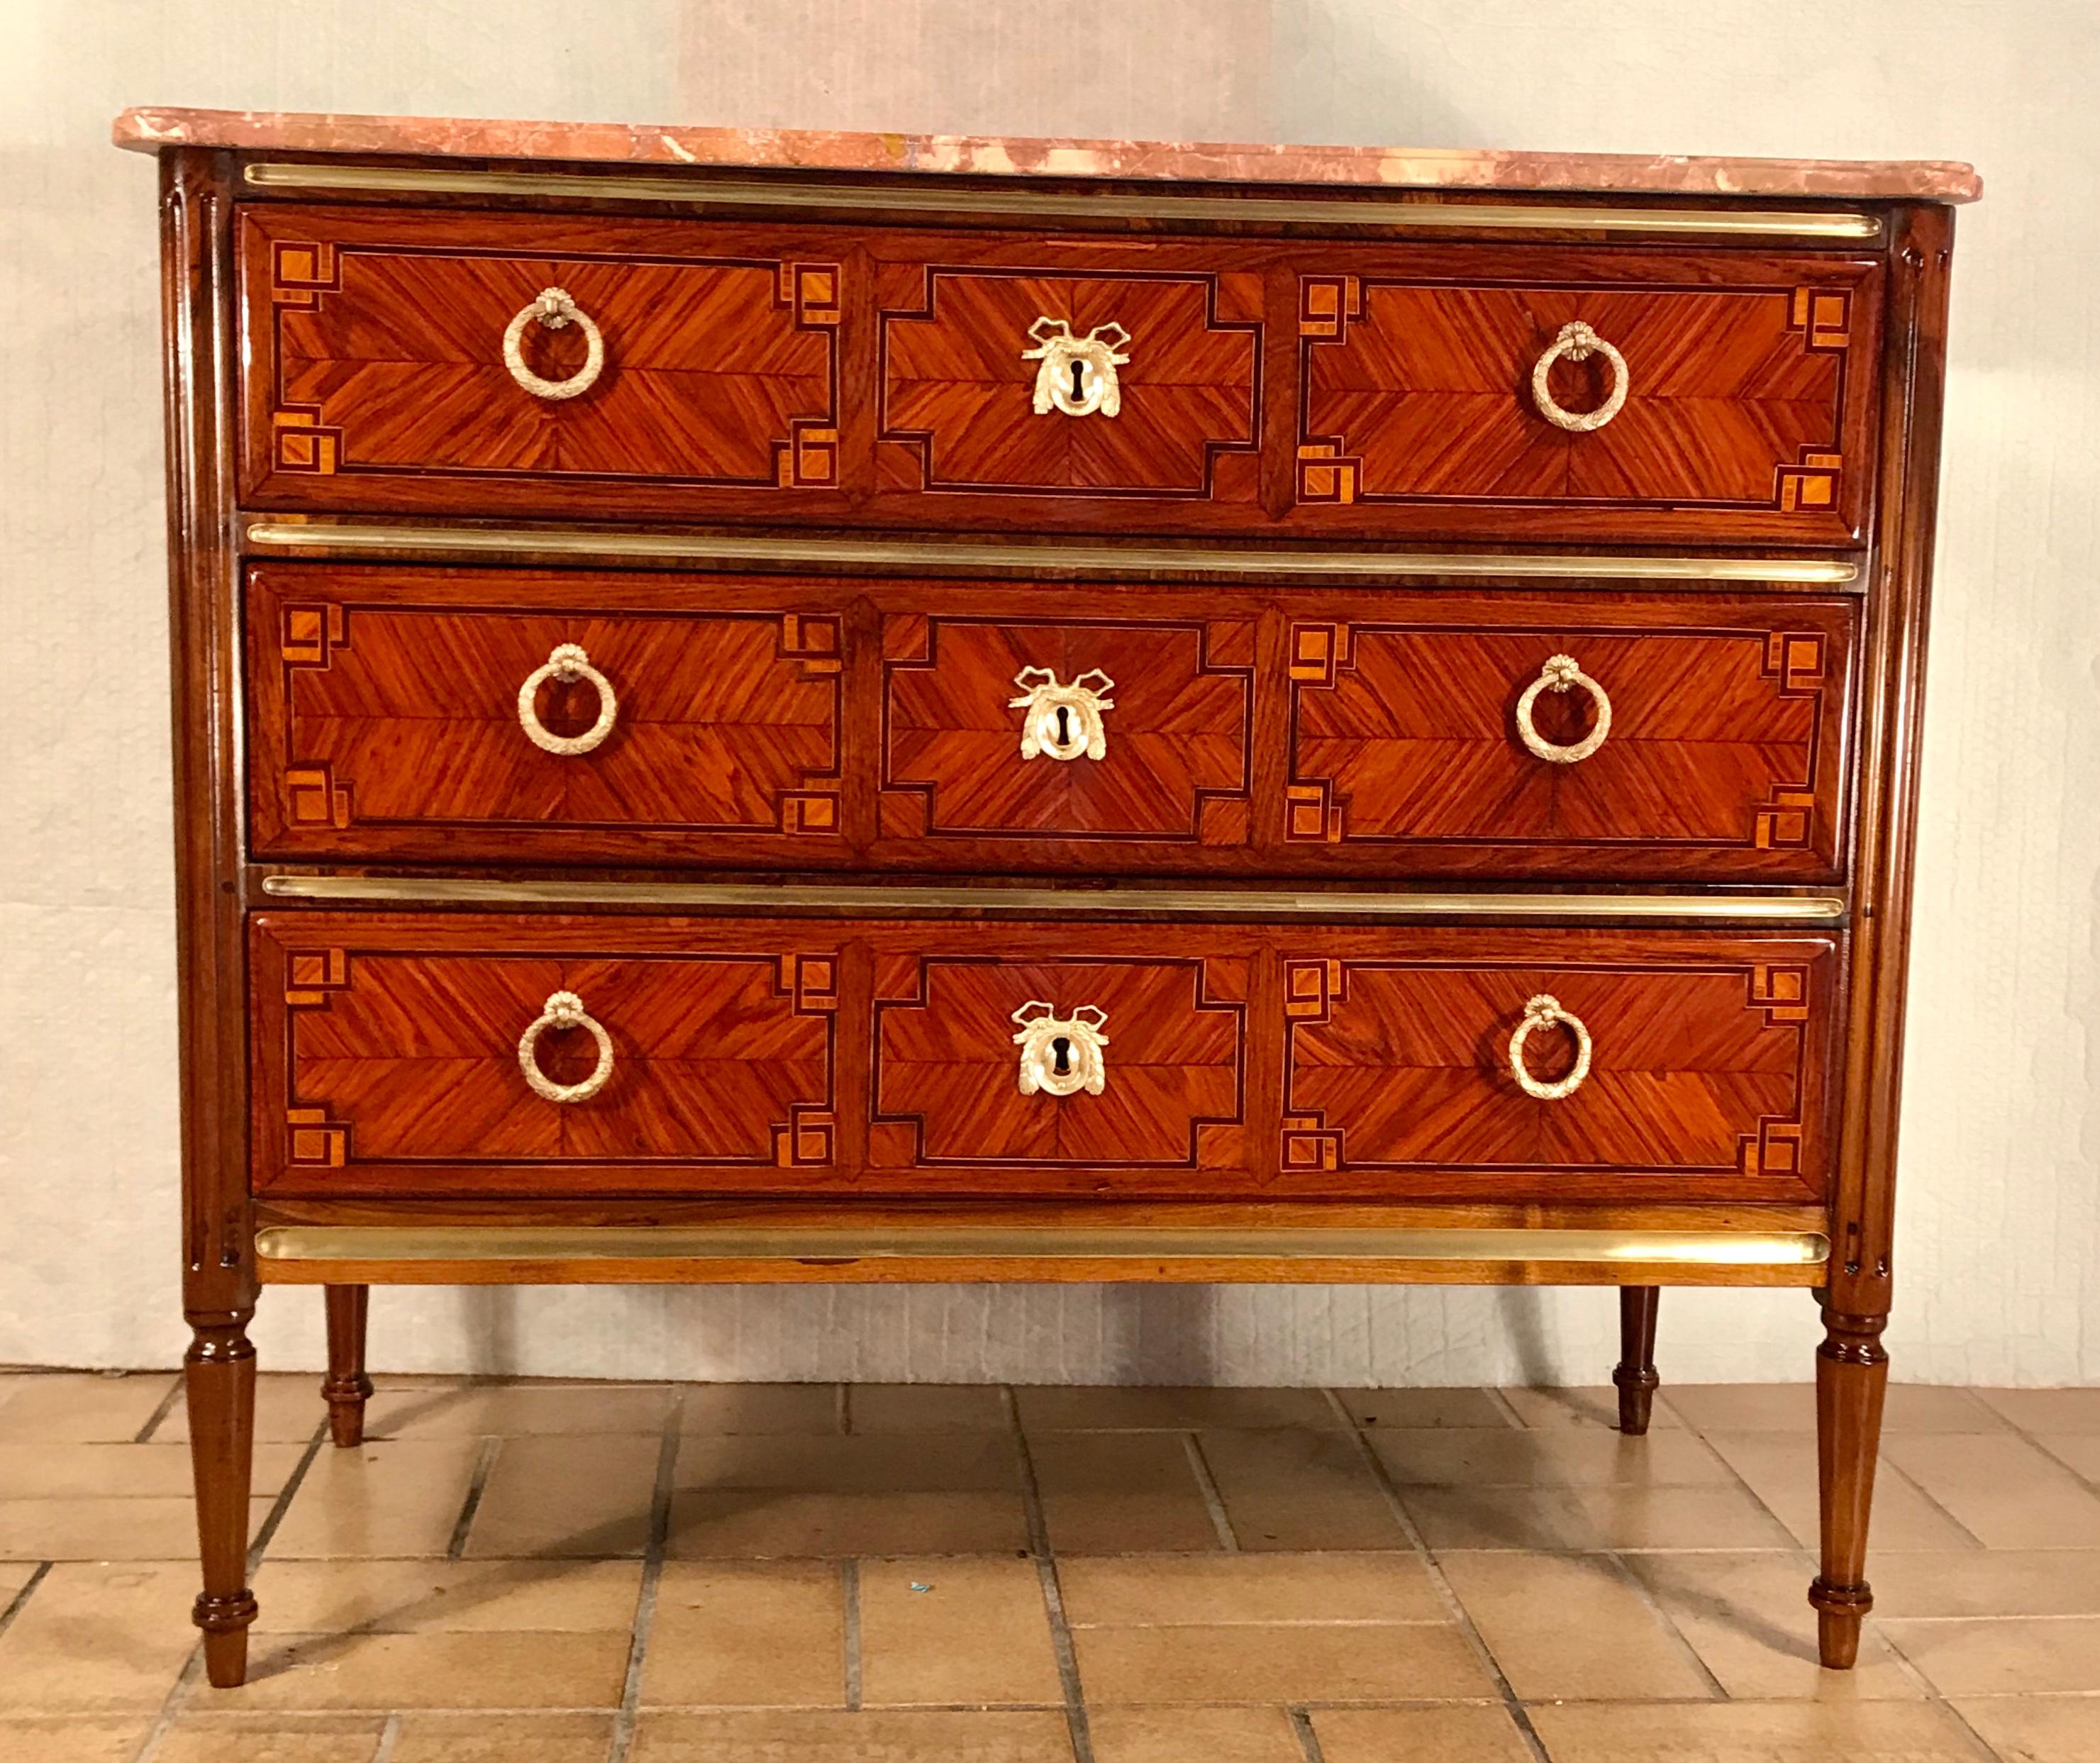 Louis XVI Commode, France, 1780.
This exquisite three drawer original Louis XVI commode is standing out for its beautiful geometric kingwood marquetry on front and sides.
The fluted legs are made of walnut. The brass fittings as well as the marble